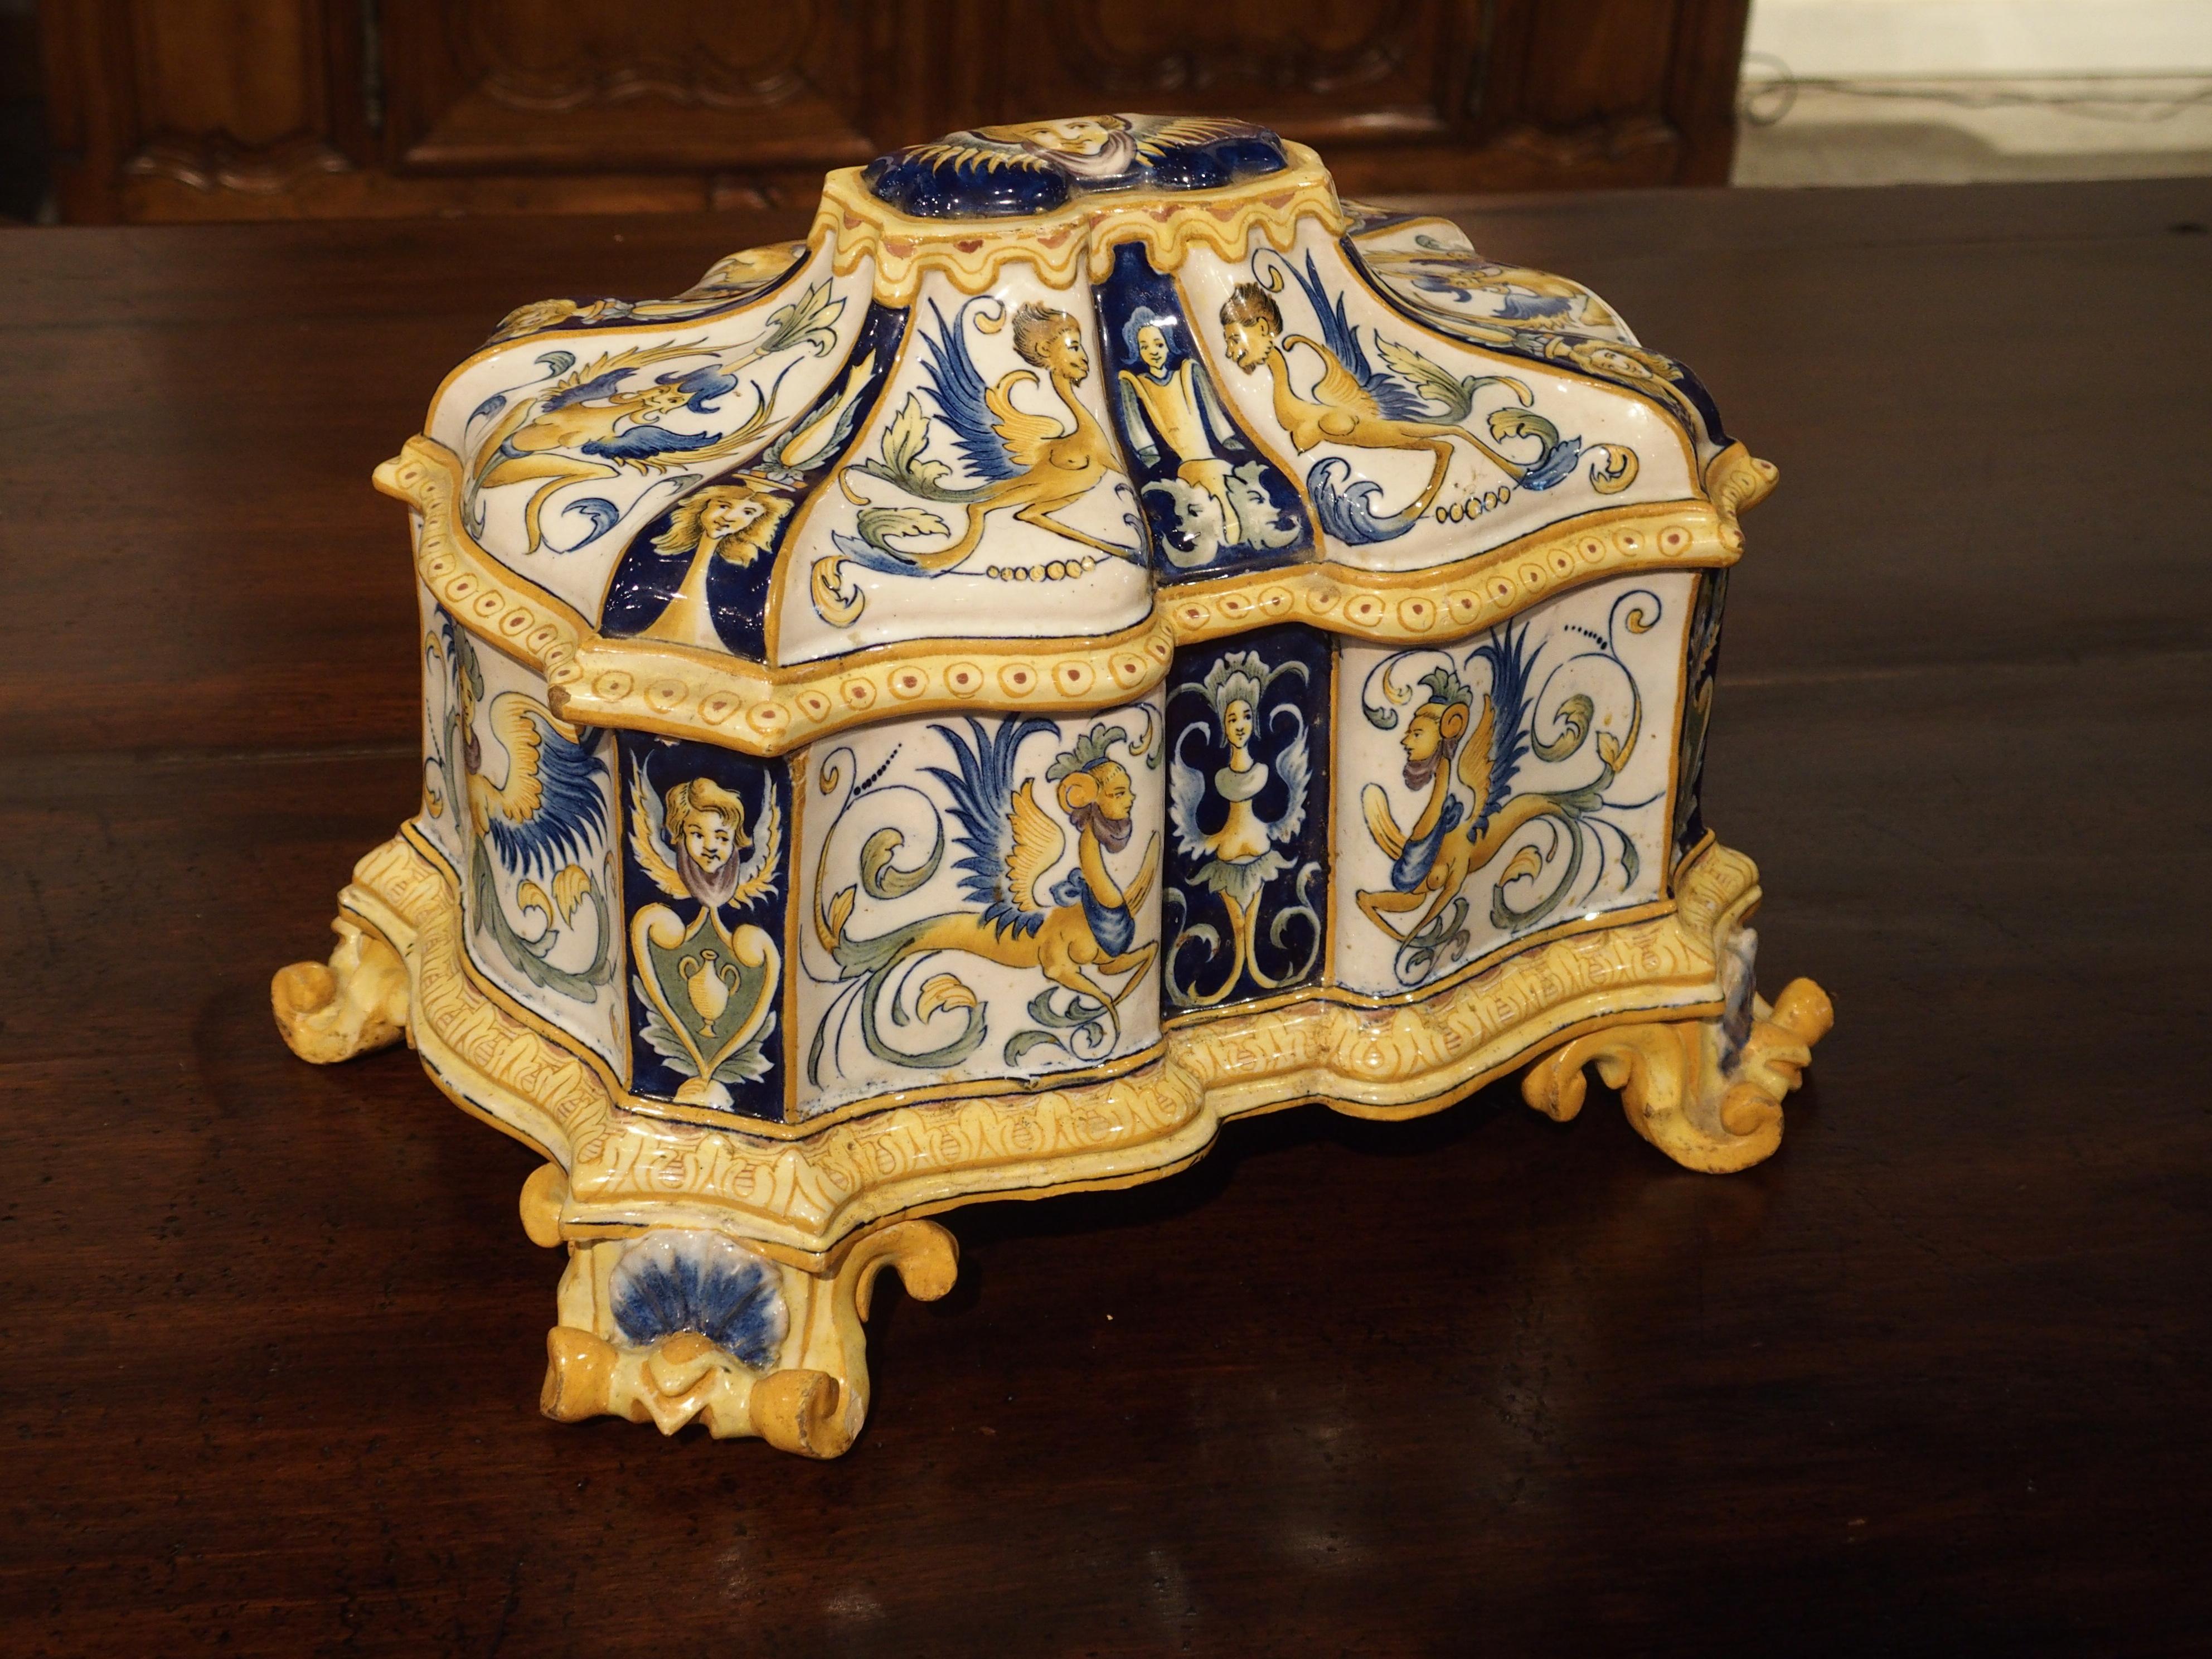 From 19th century, Italy, this shaped majolica box has hand-painted, female, winged, half-figure motifs with varying ornamentation below the waist. The lid has a raised, shaped top with an area at the center which matches the shape of the body.